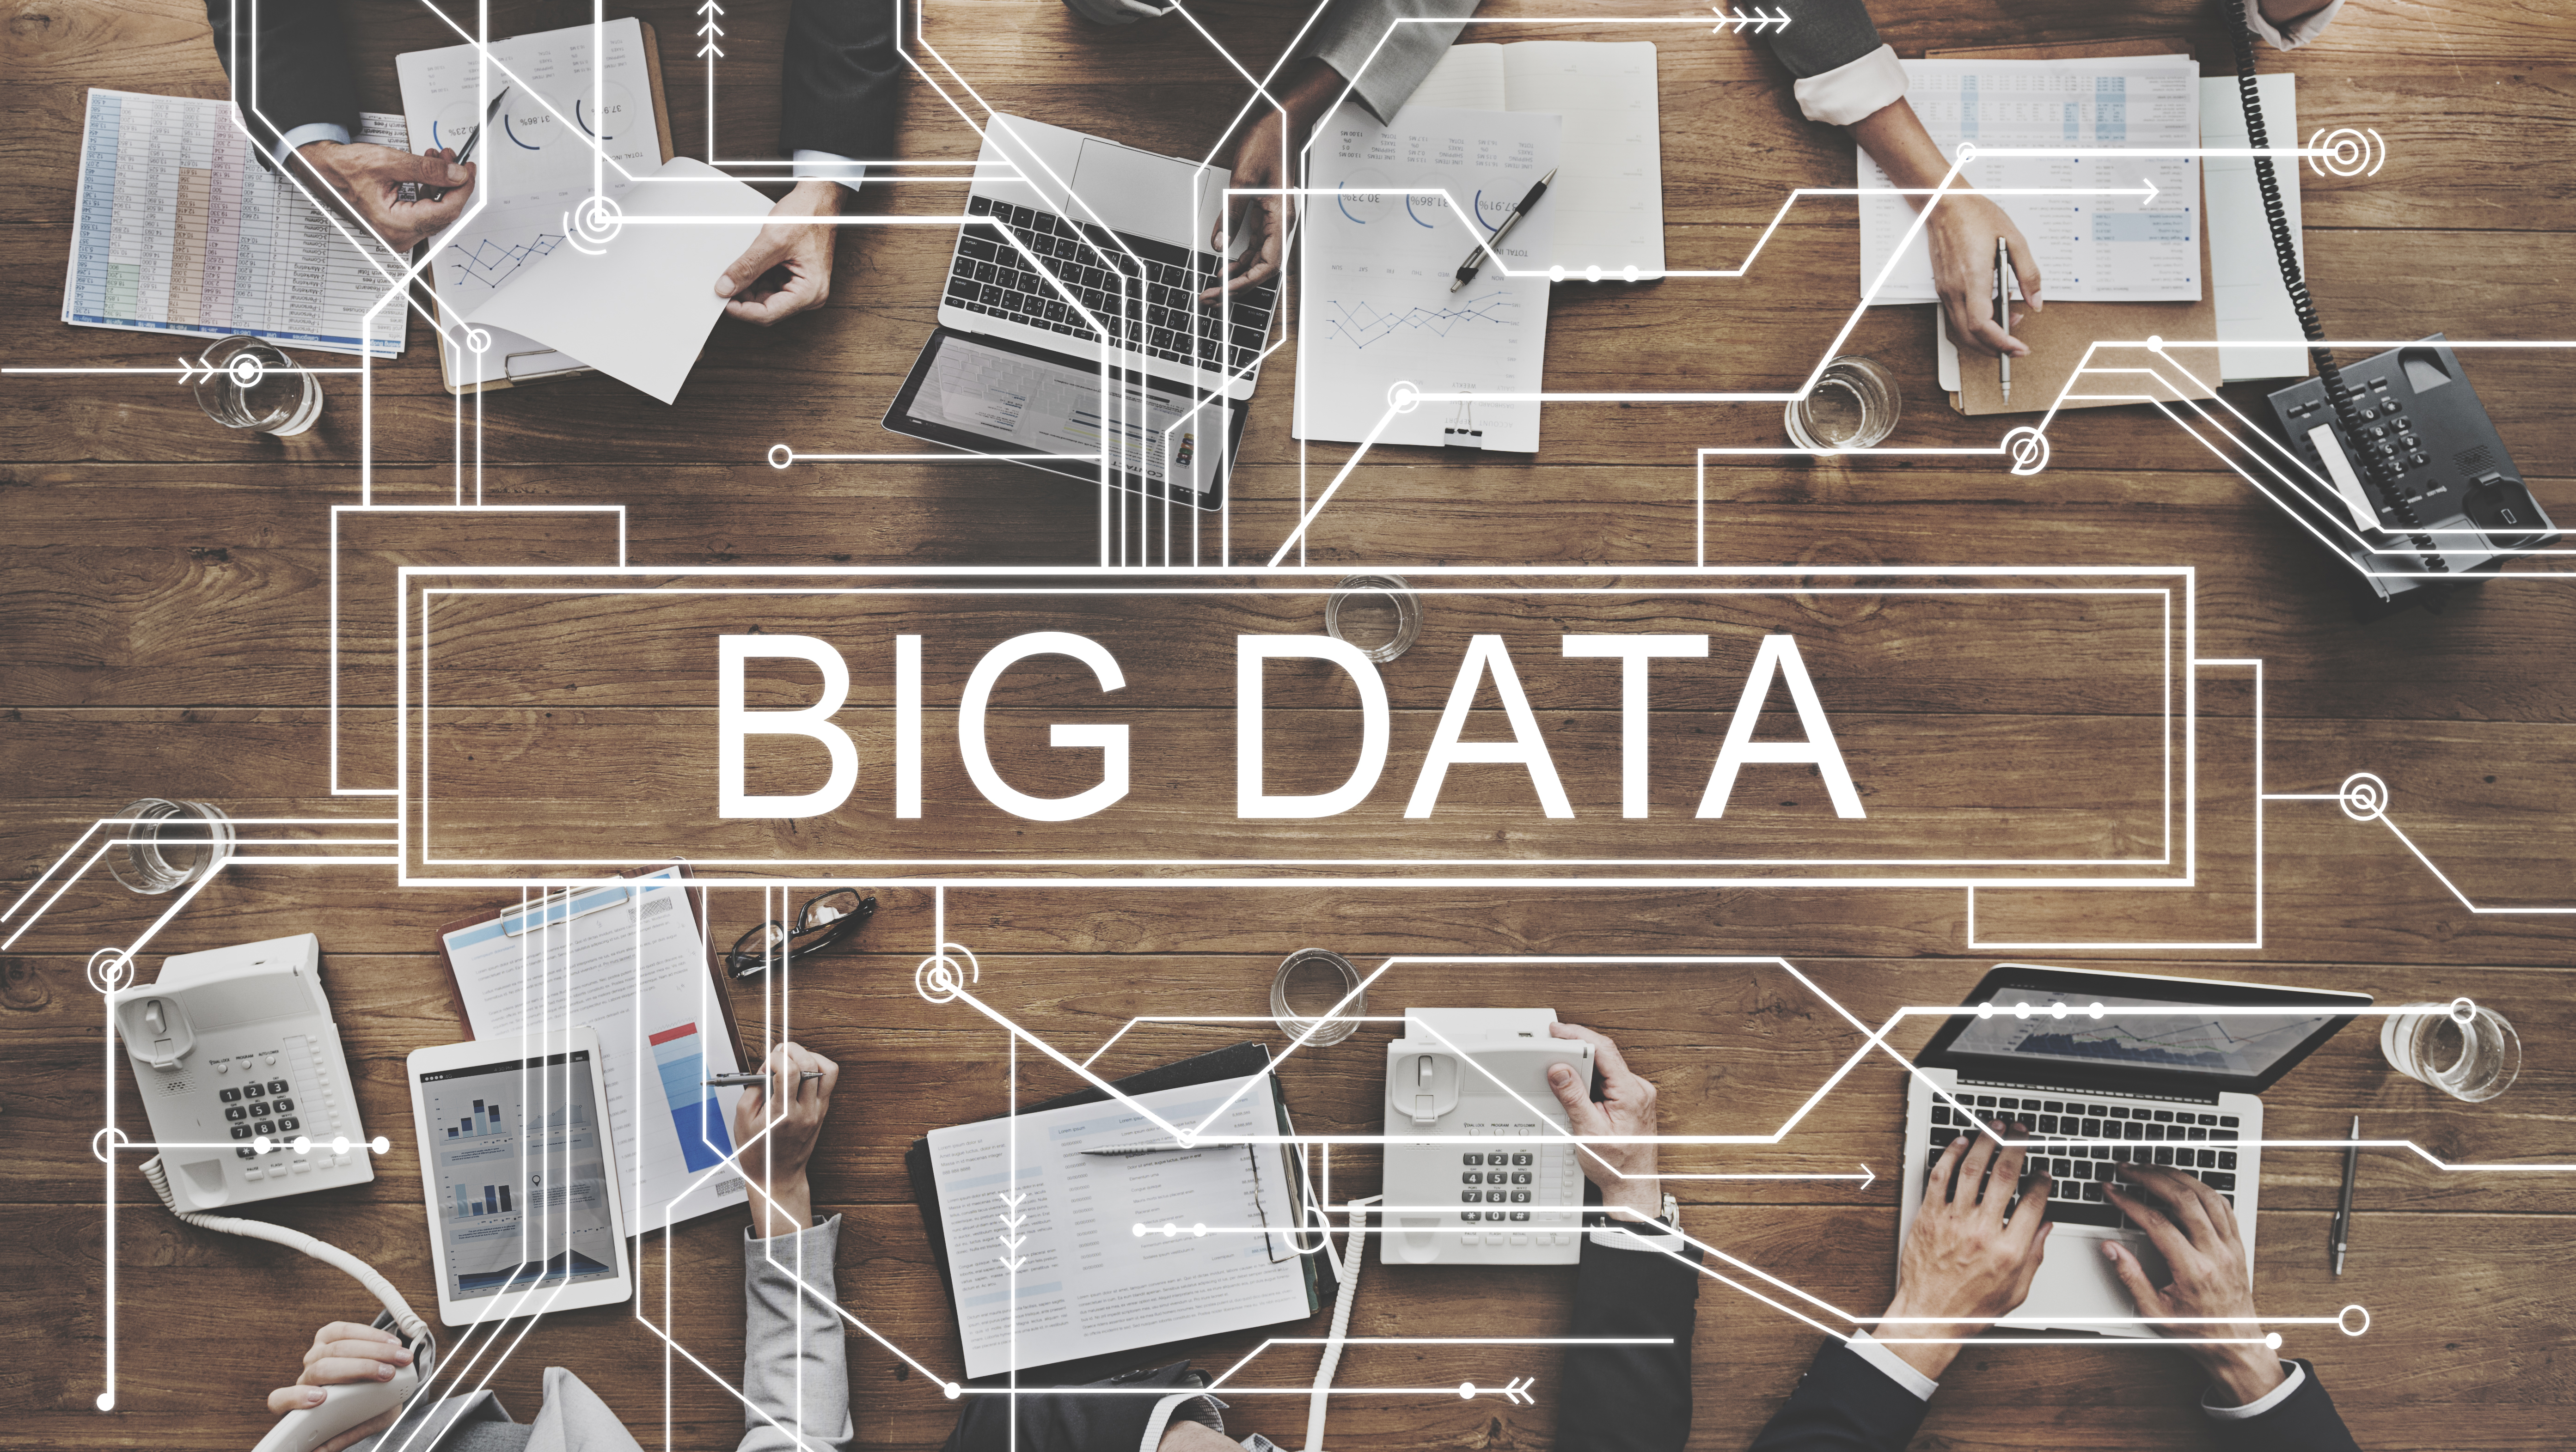 Investment in Big Data is up, but fewer organisations plan to invest, says Gartner